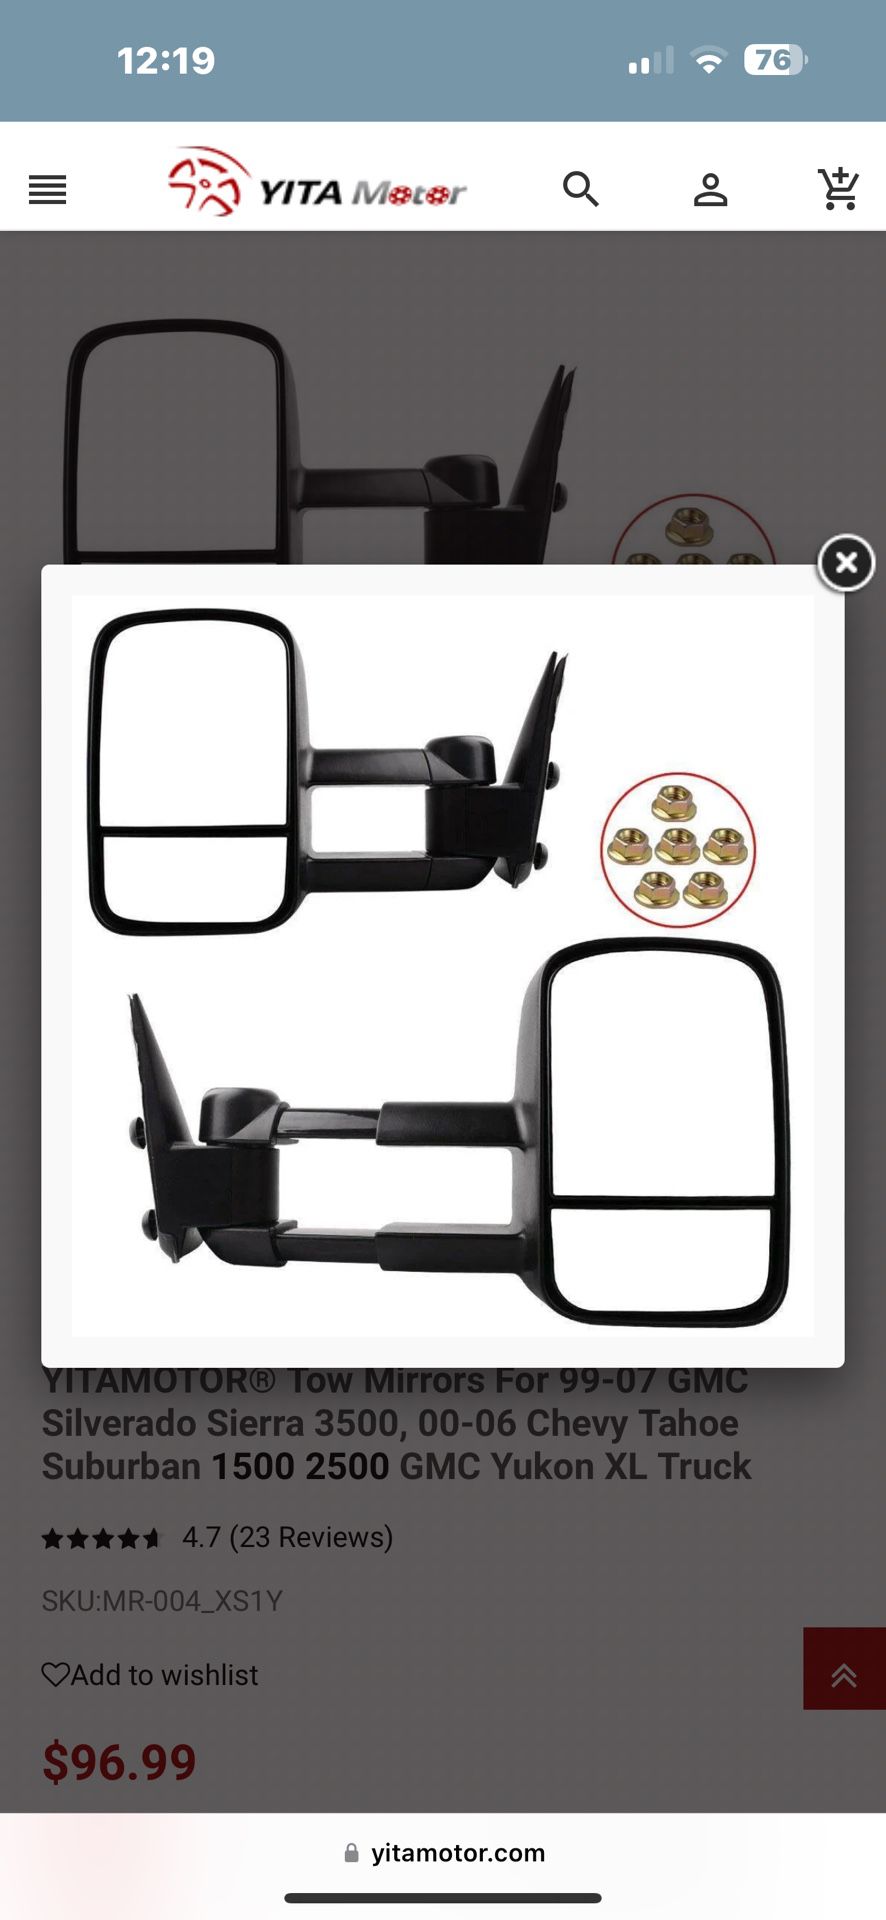 Chevy GMC Towing Mirrors 